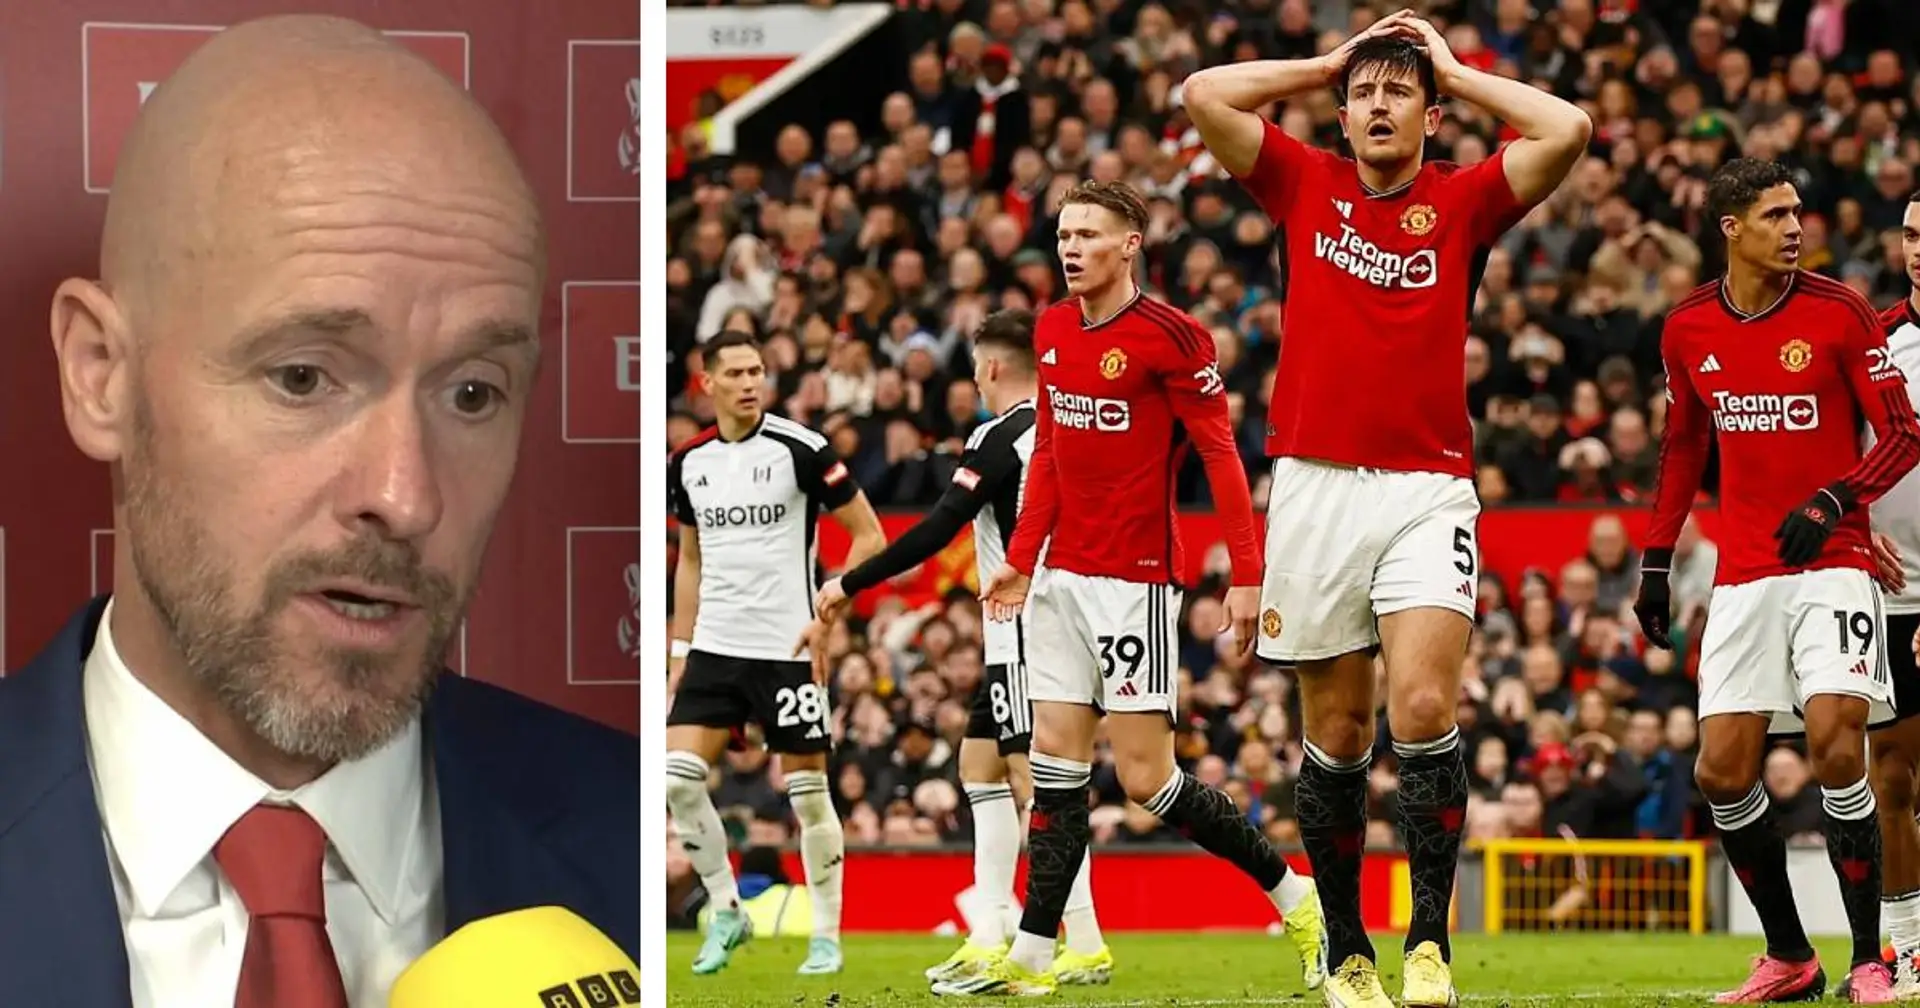 'Look in the mirror': Ten Hag reminds squad of Man United standards before Nottingham Forest clash